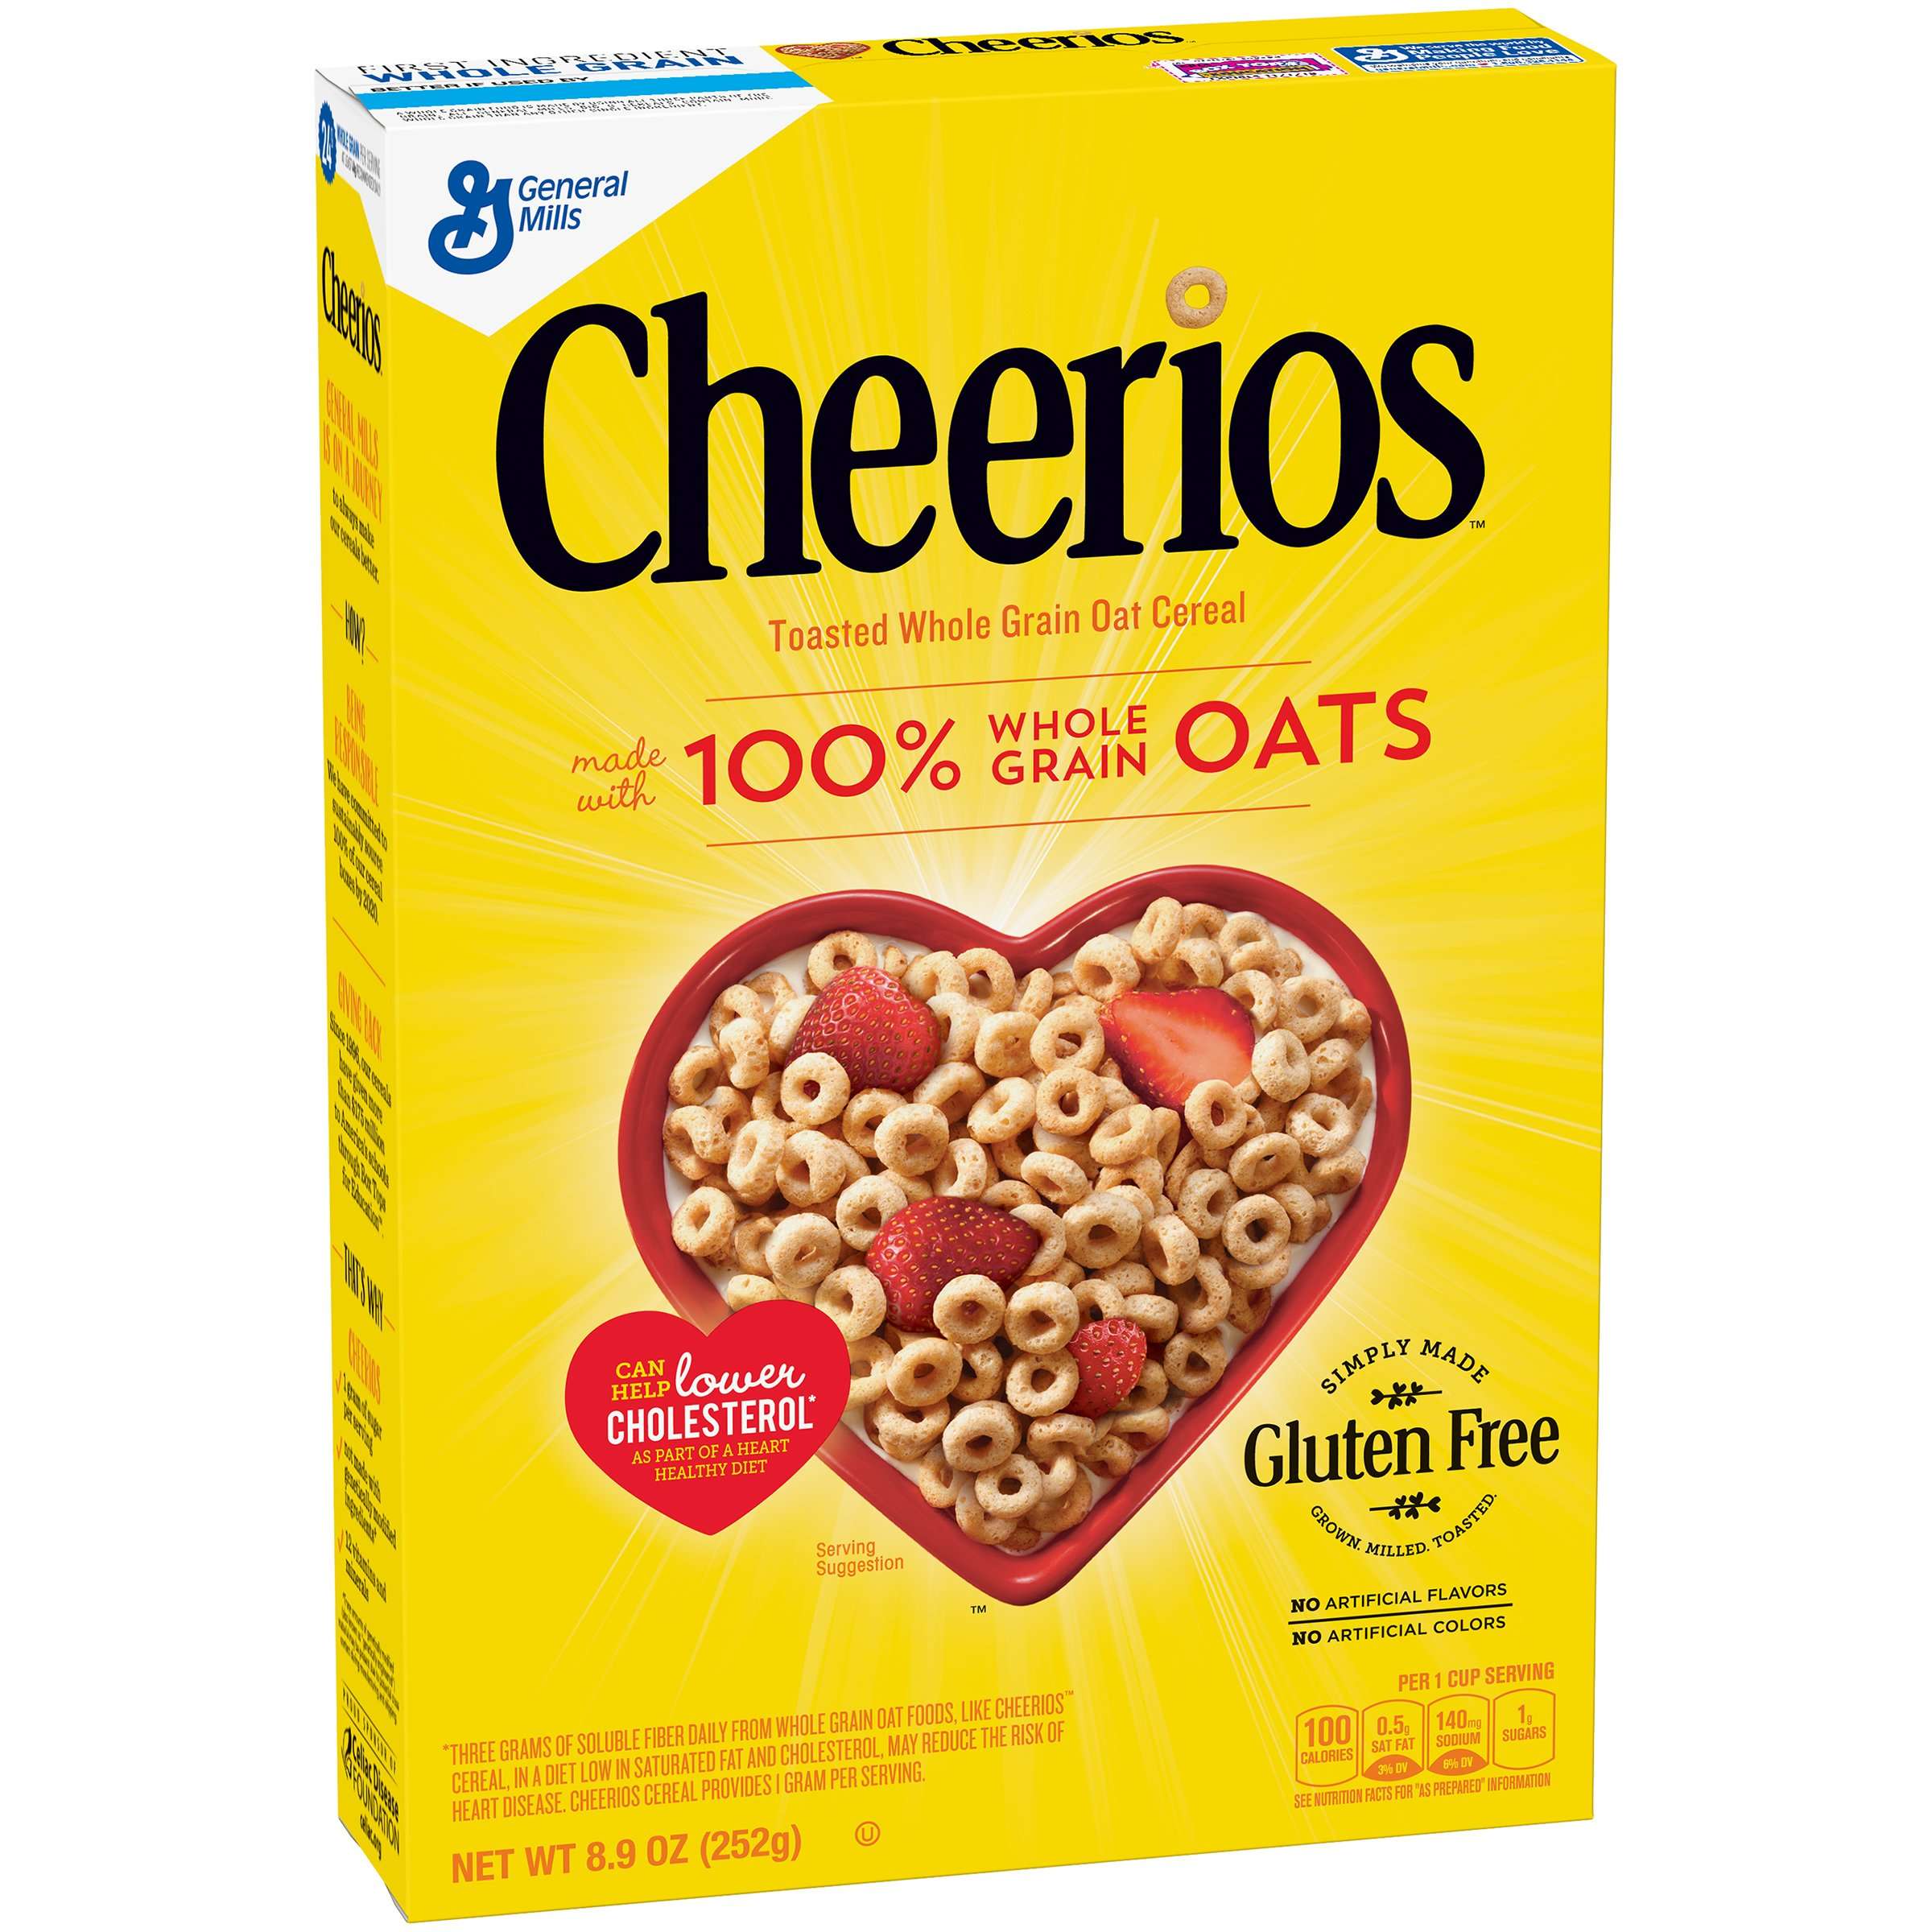 Is there any cereal better than cheerios for lowering ...